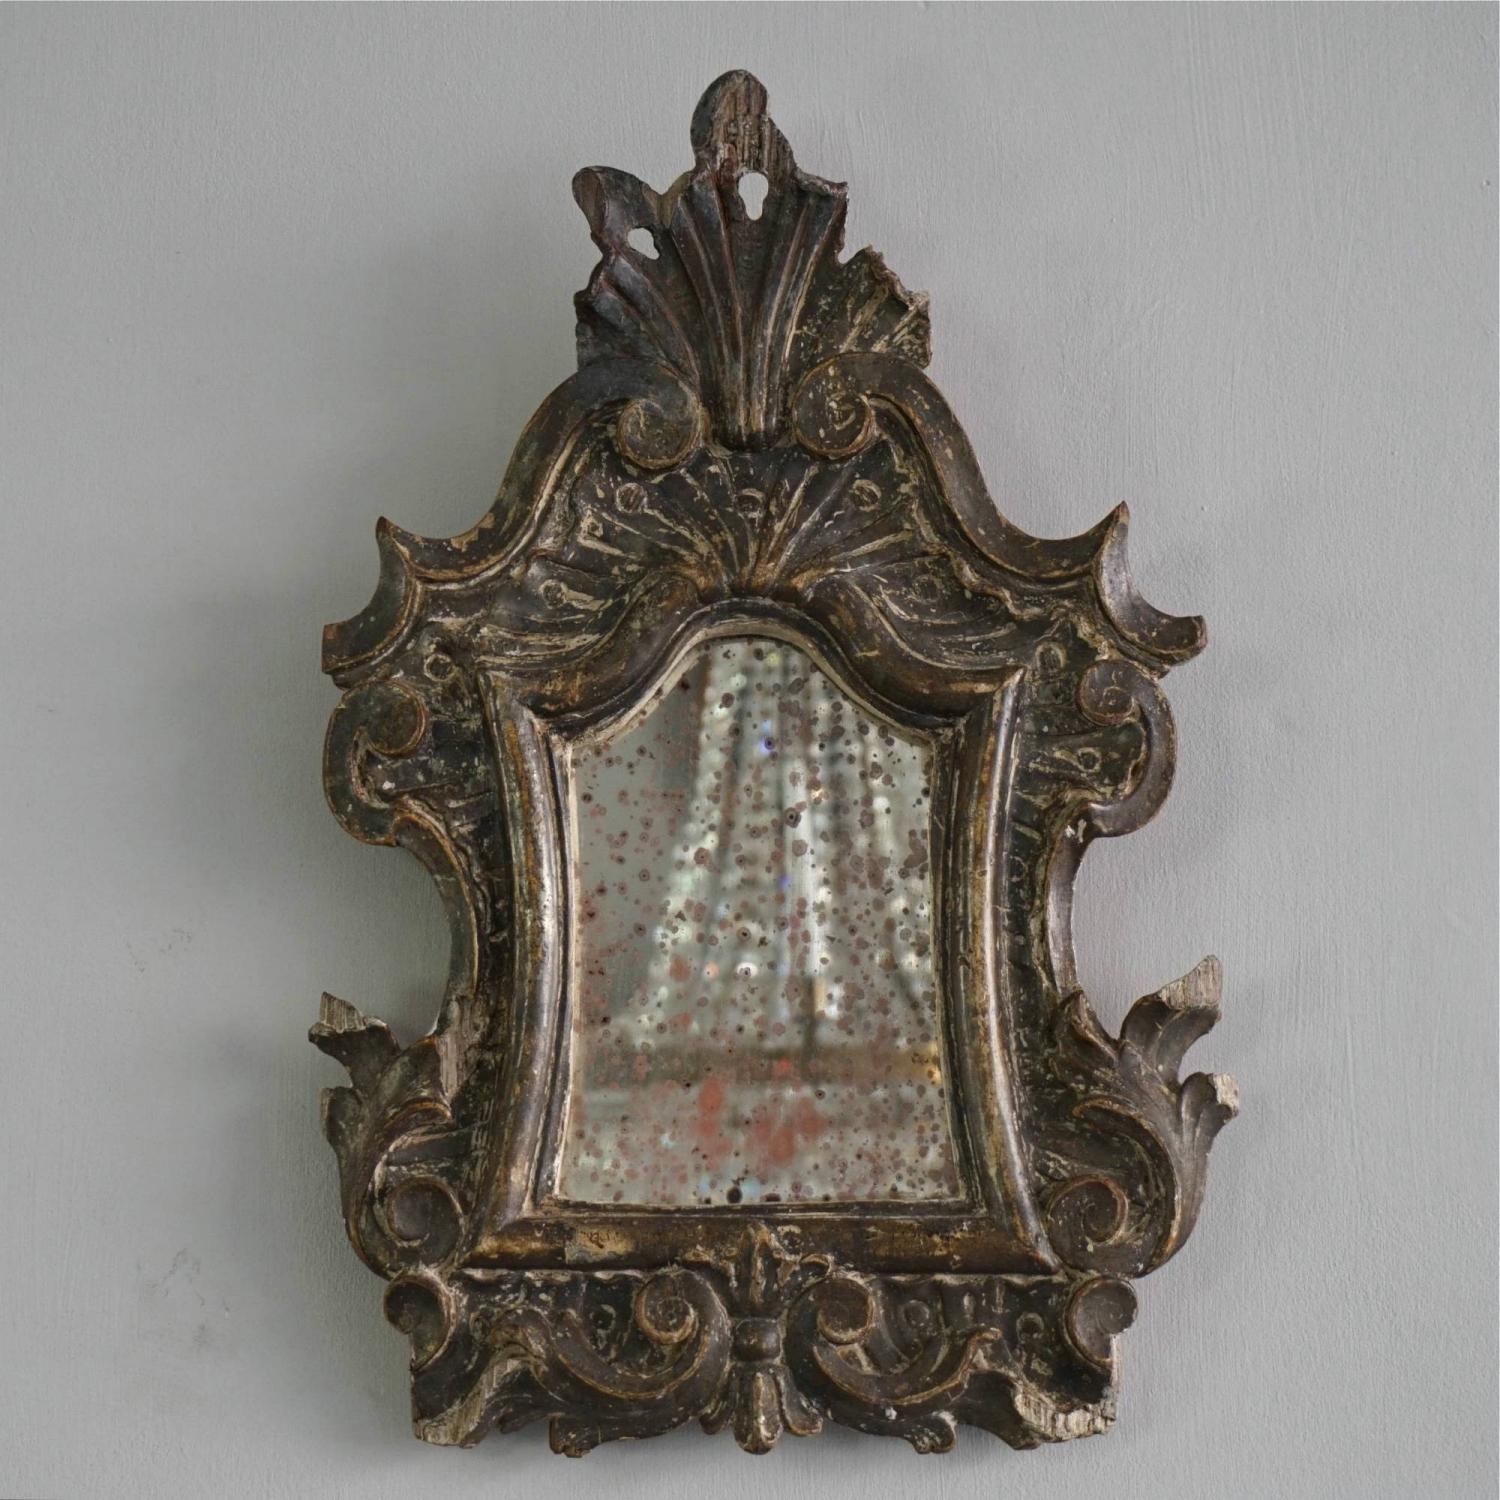 CHARMING 1750'S HAND CARVED ITALIAN BAROQUE MIRROR